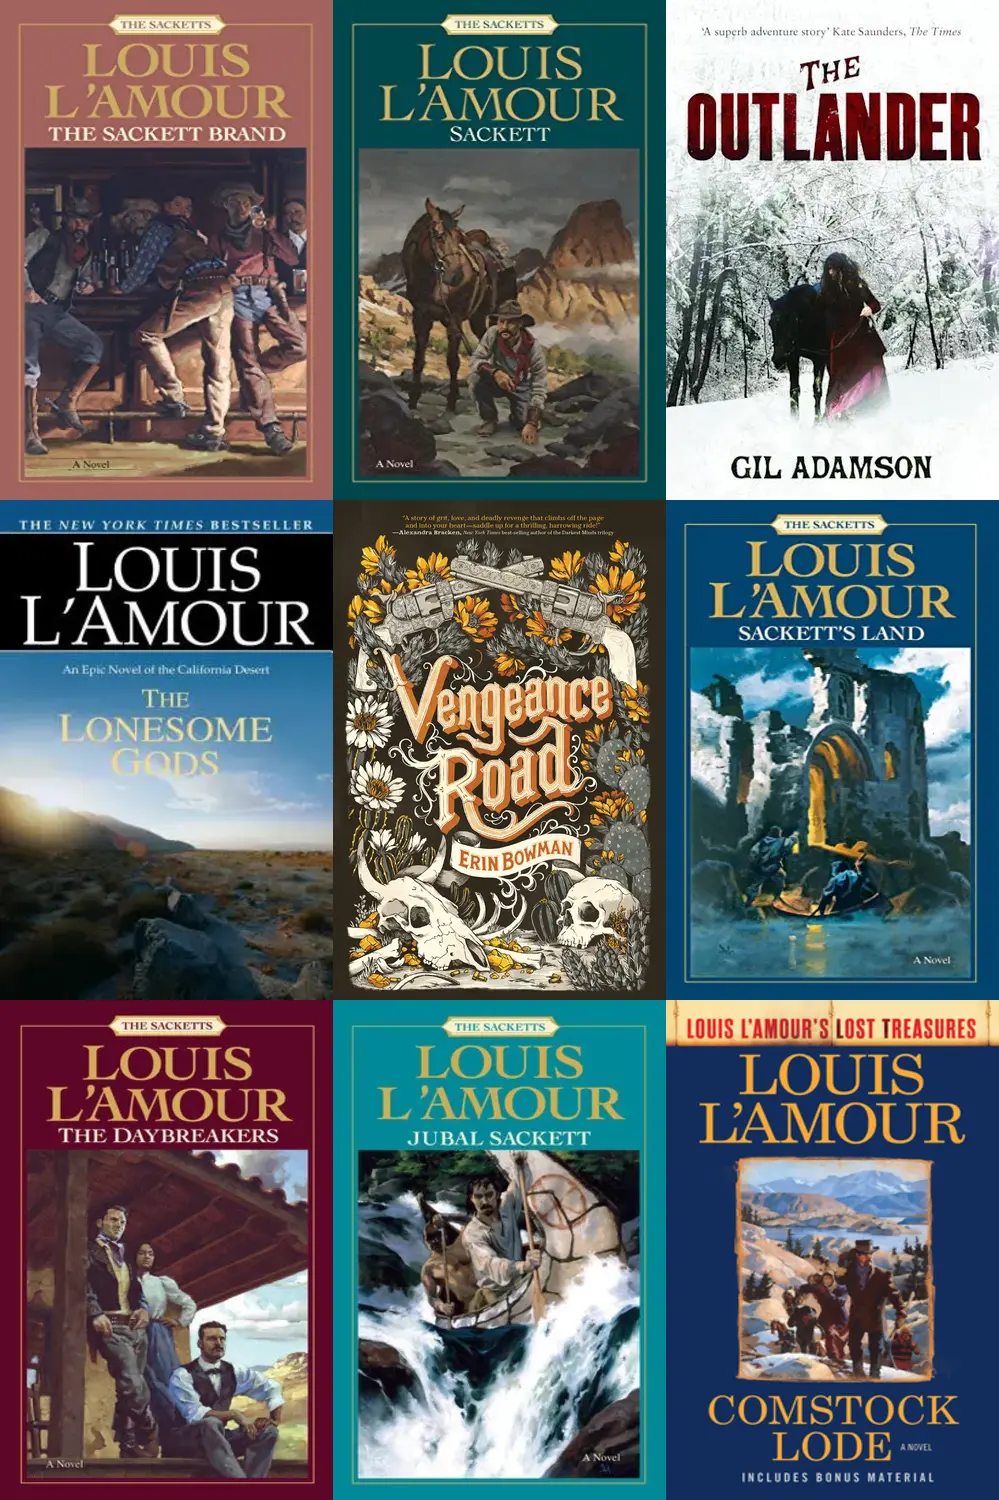 Ride the River : The Sacketts by Louis L'Amour